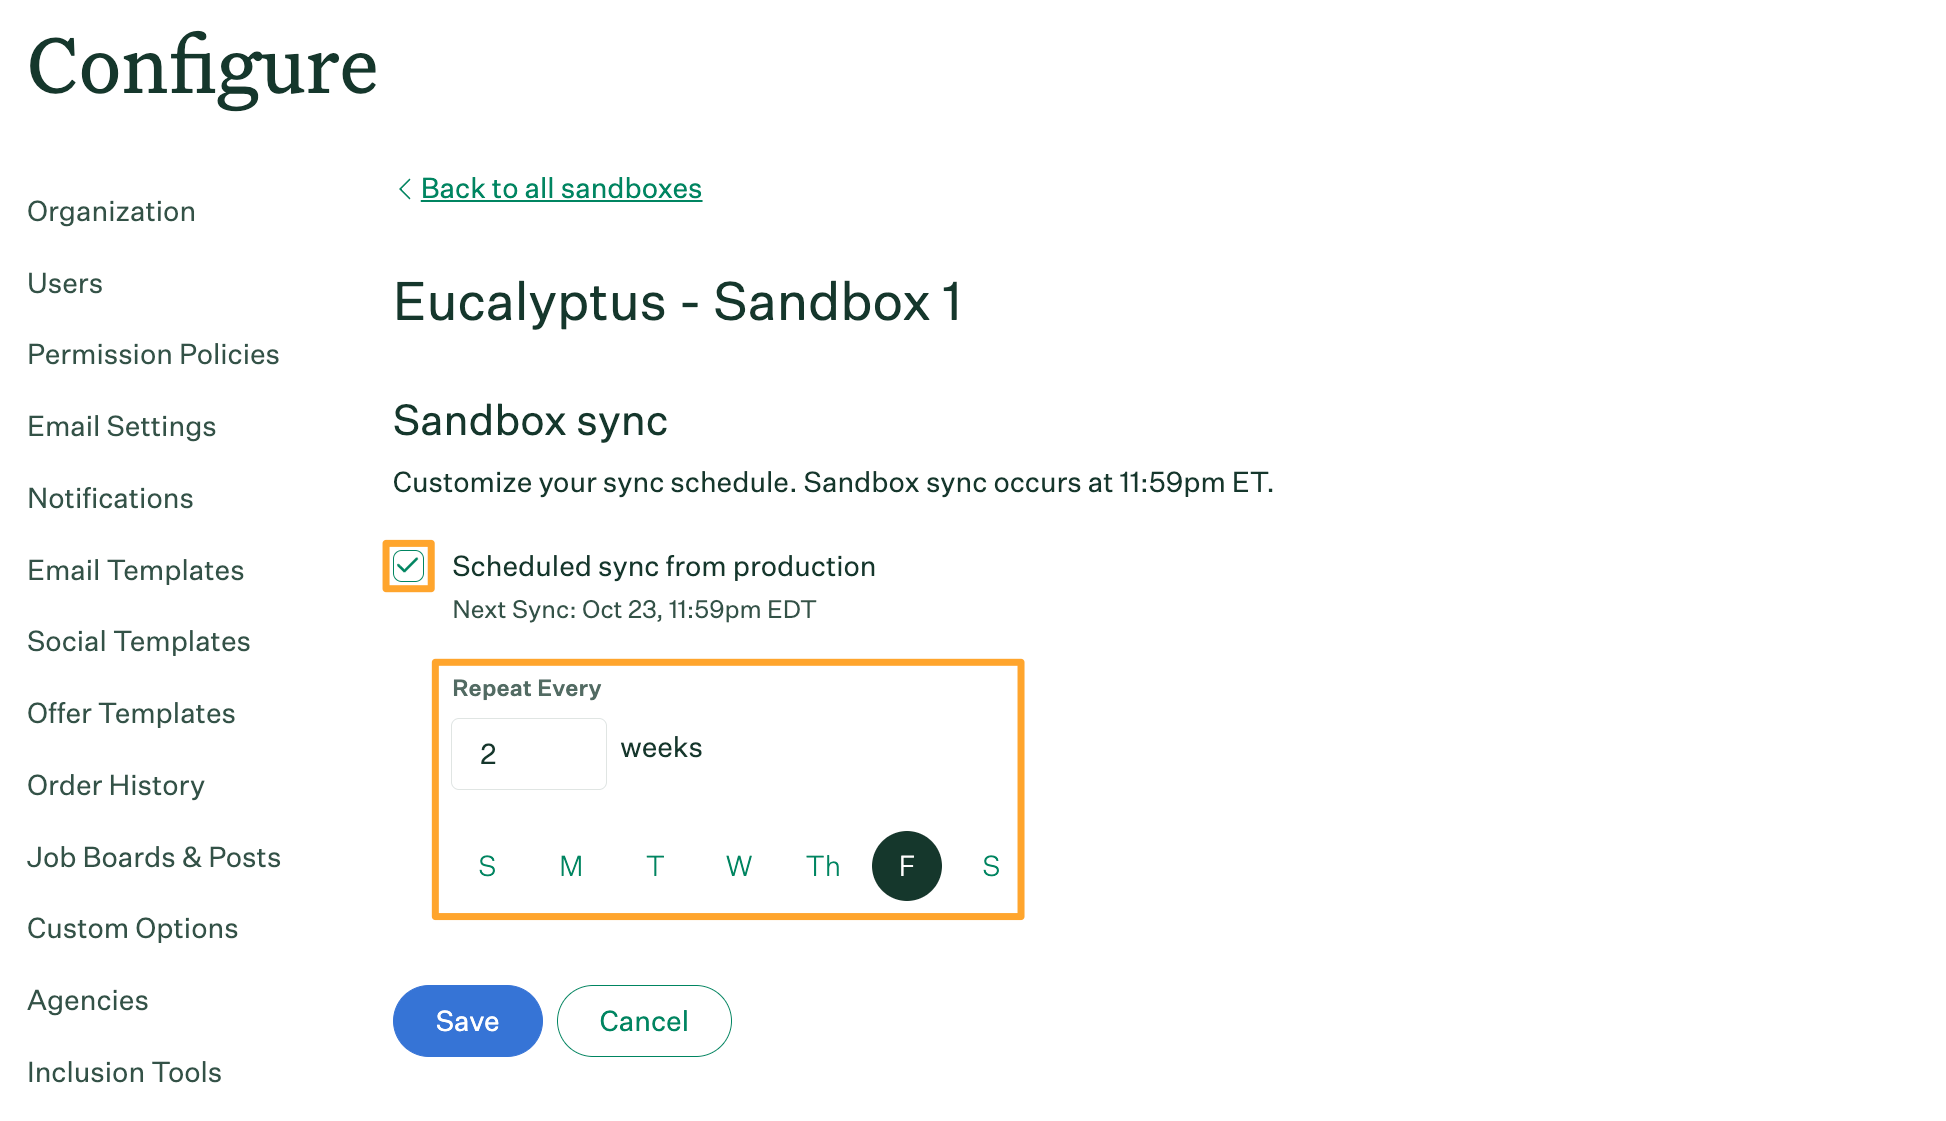 Sandbox sync settings are shown with a sync set to occur every 2 weeks on Fridays